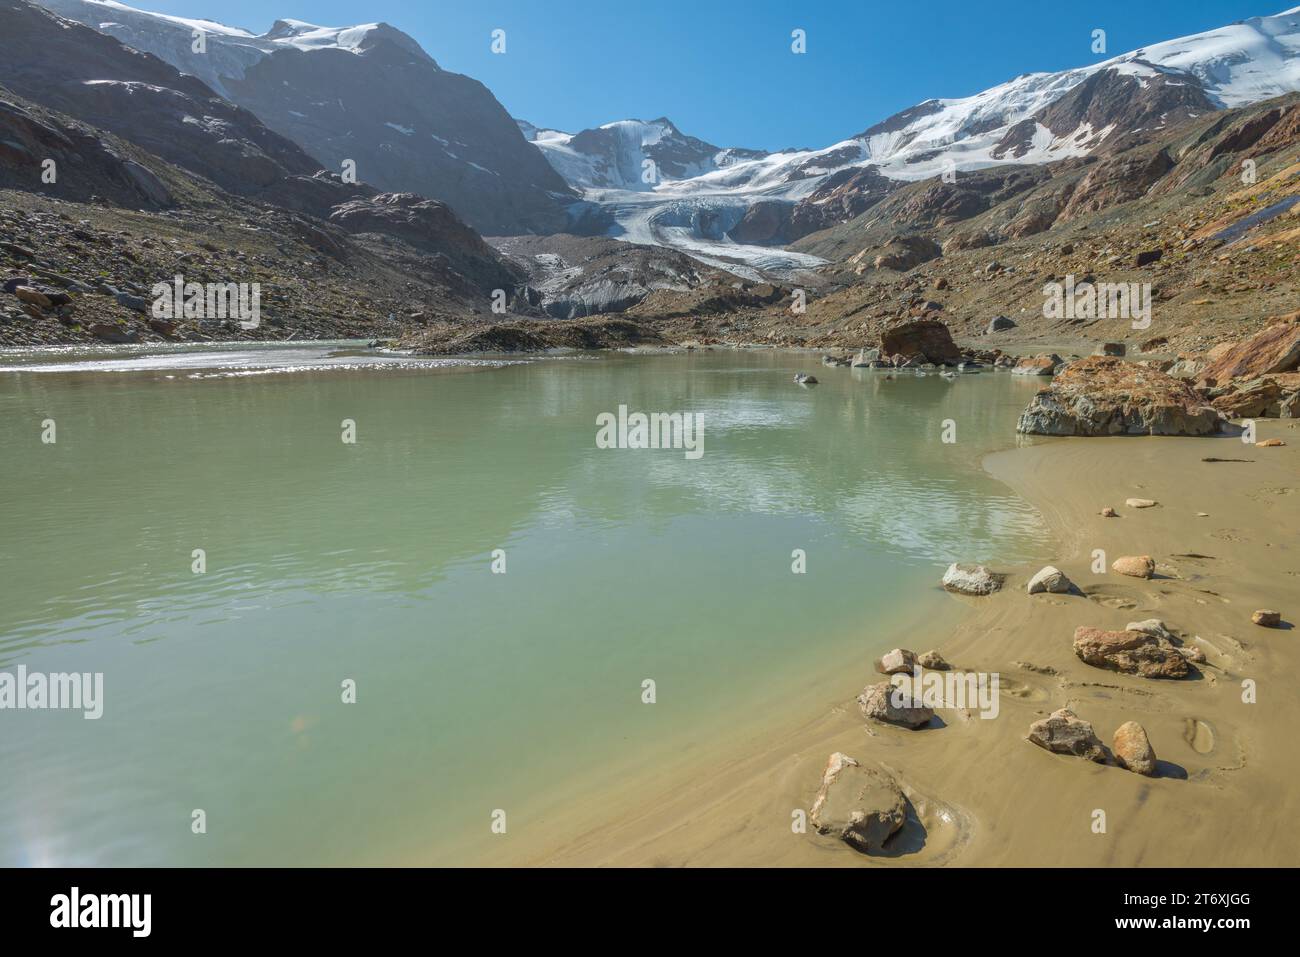 Forni Glacier in the Italian Alps, with glacial tongue melting onto a glacial stream loaded with silt. Small beach with wet sand and stones. Stock Photo